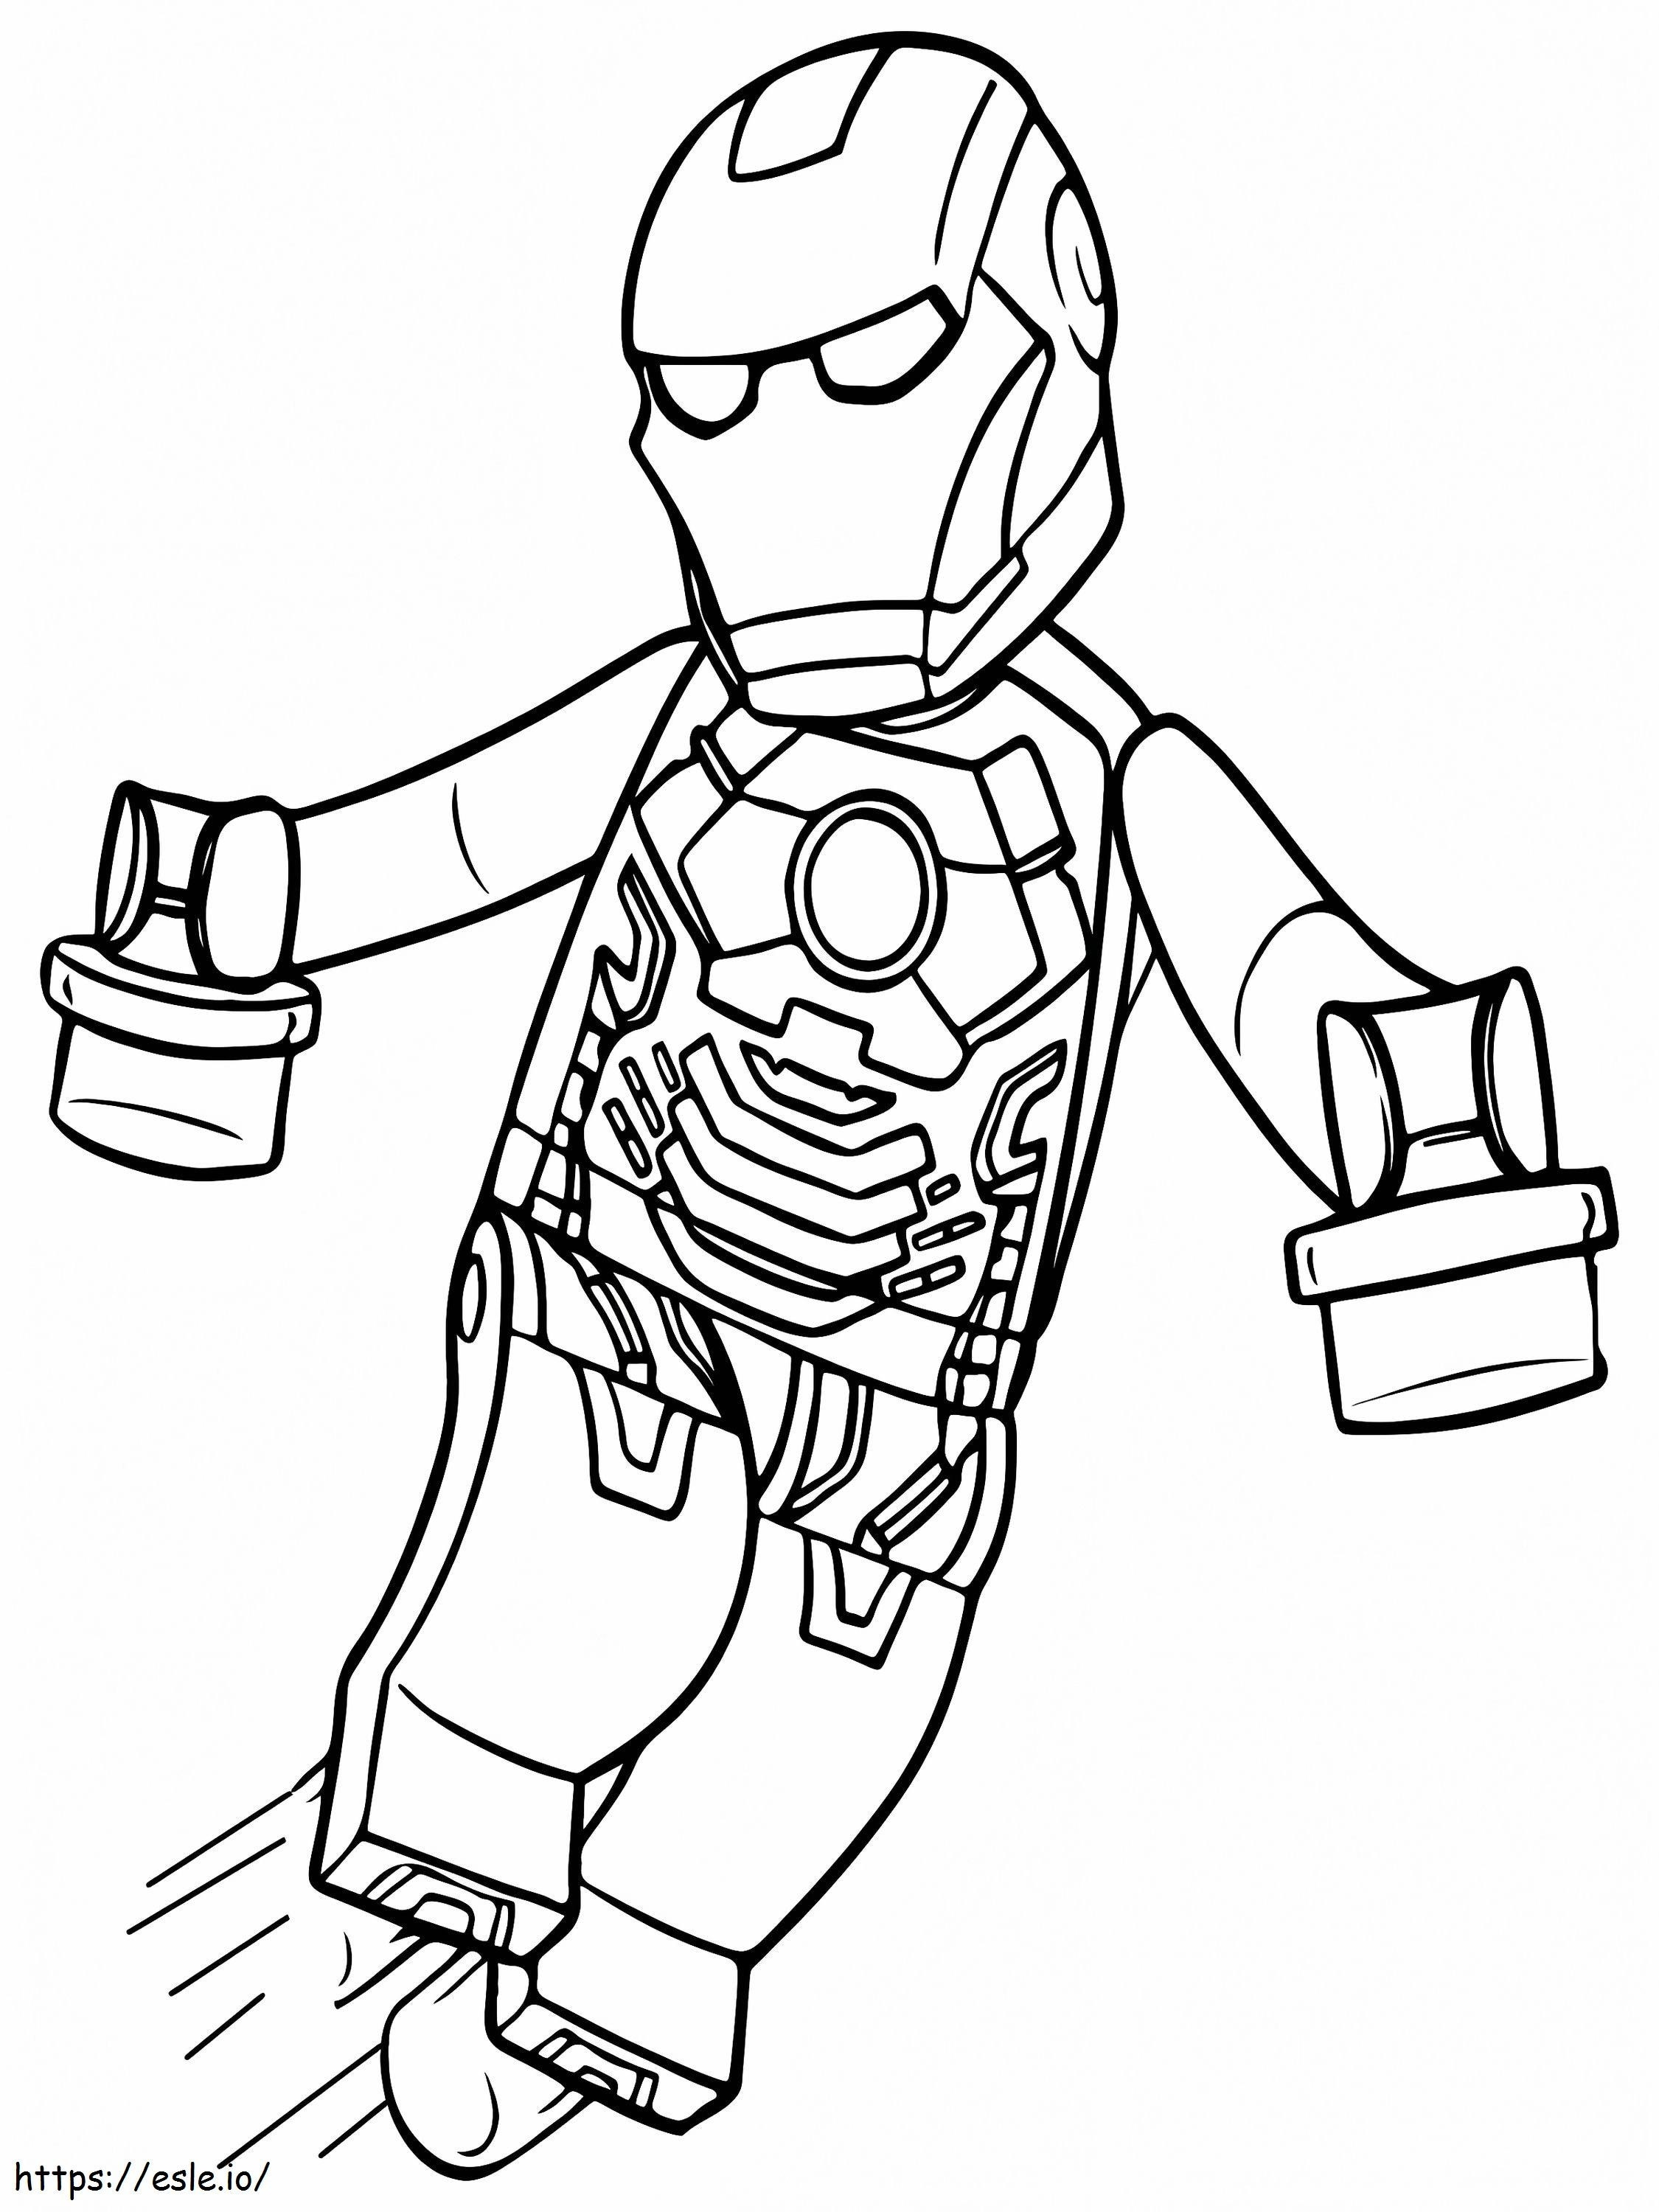 Iron Man Flying Lego Avengers coloring page